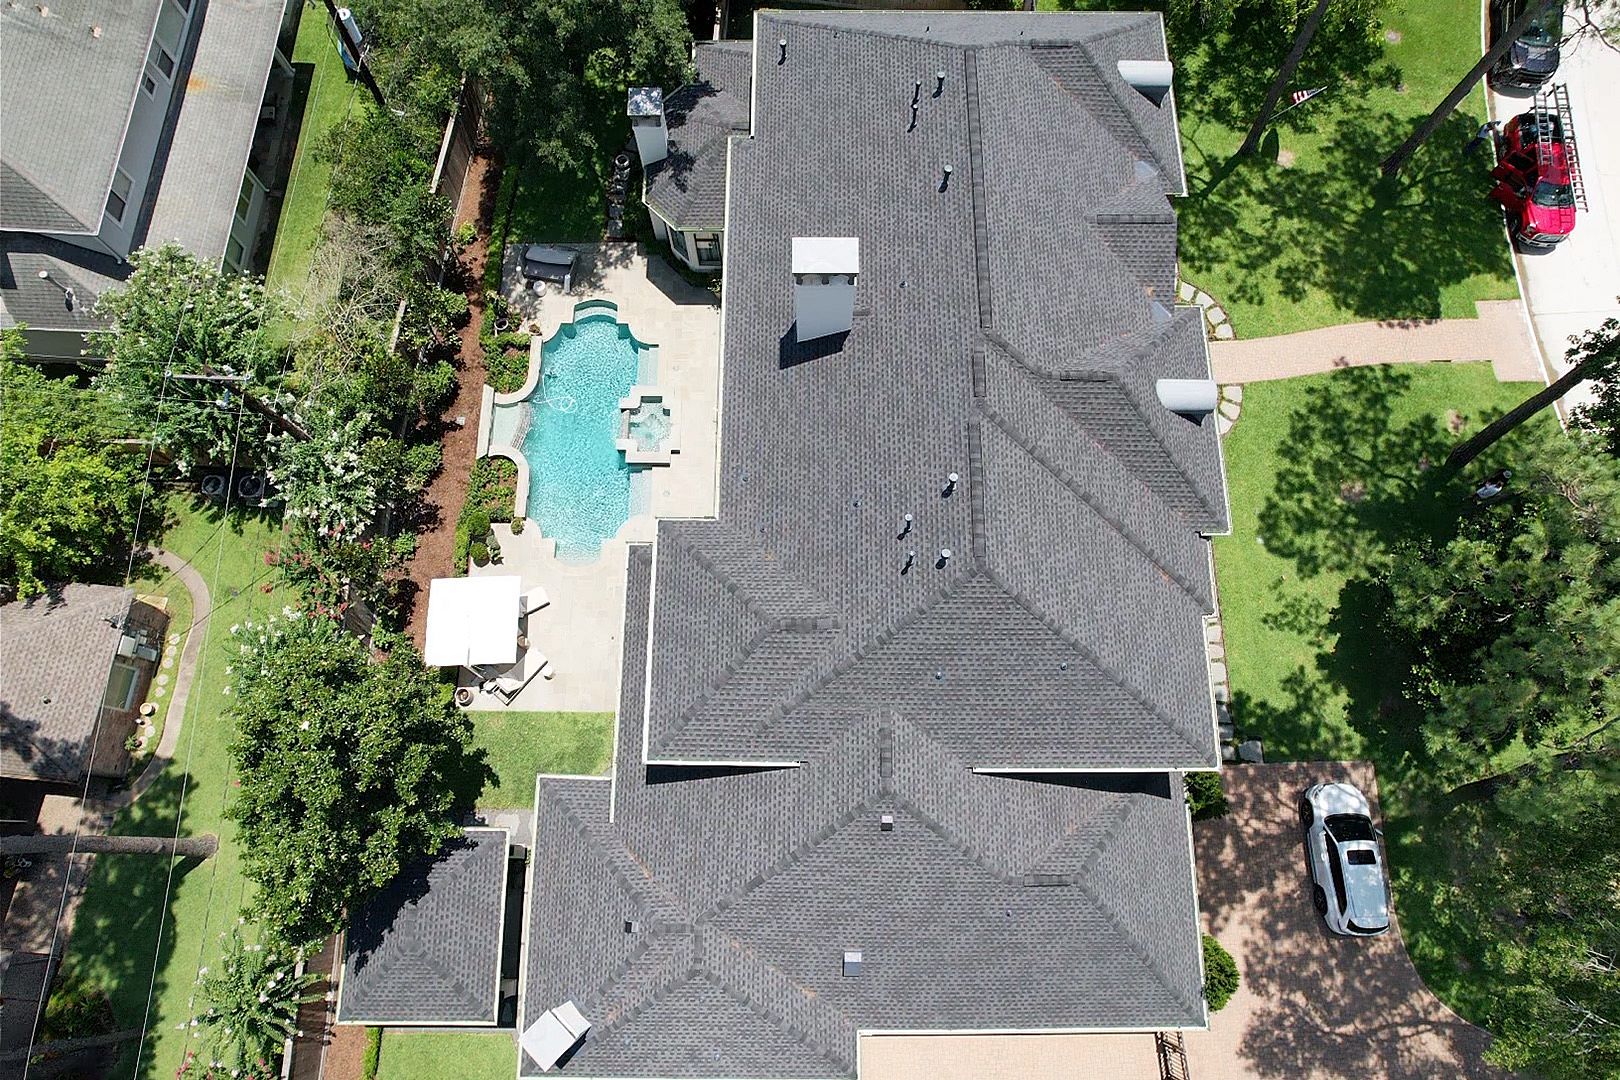 Overhead view of multi-layered roof with tan shingles.